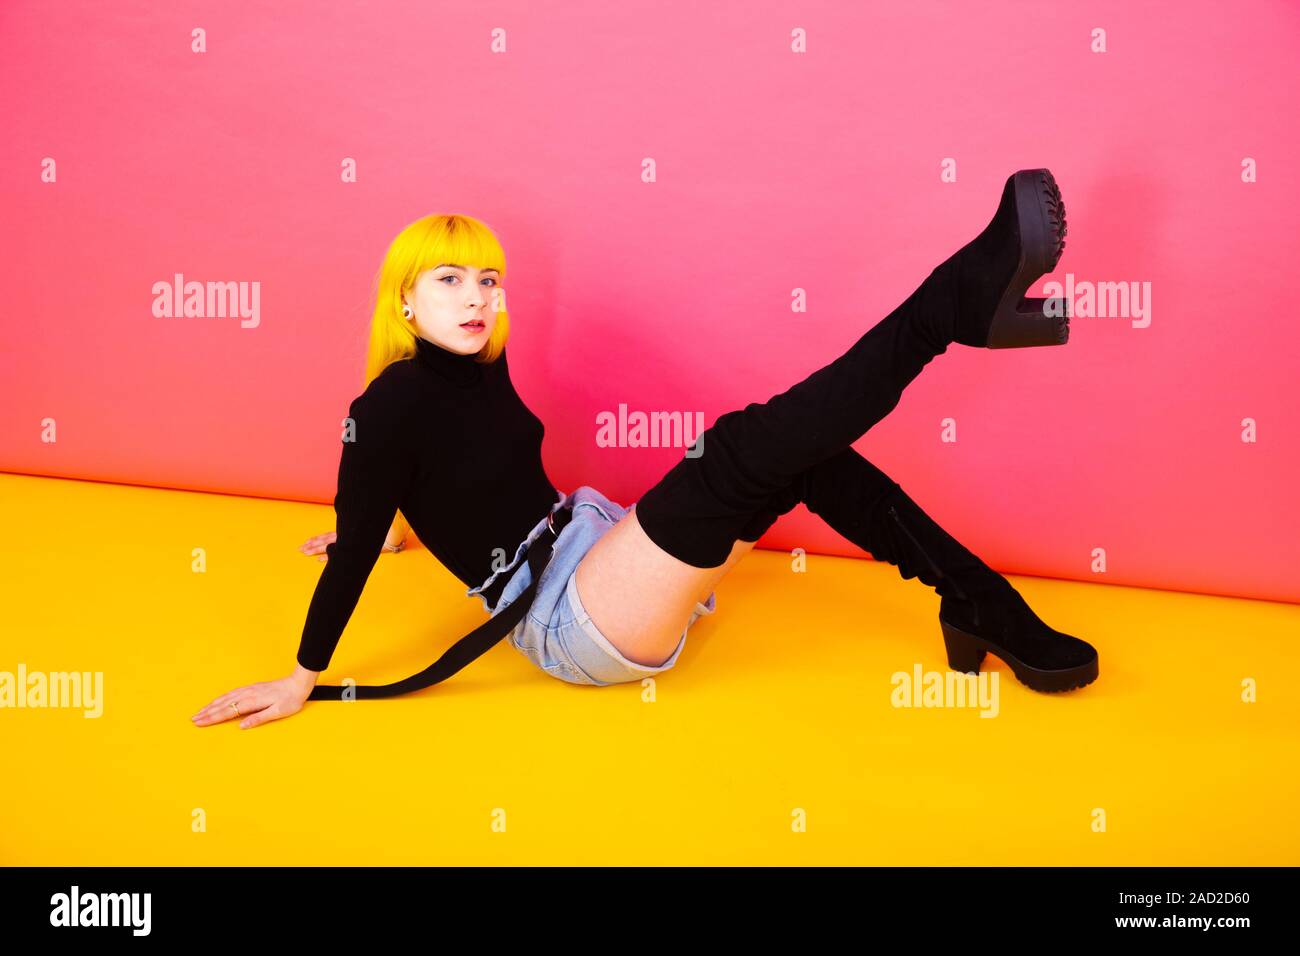 A young woman with bright yellow hair sitting down wearing over knee boots against a bright pink / yellow background Stock Photo